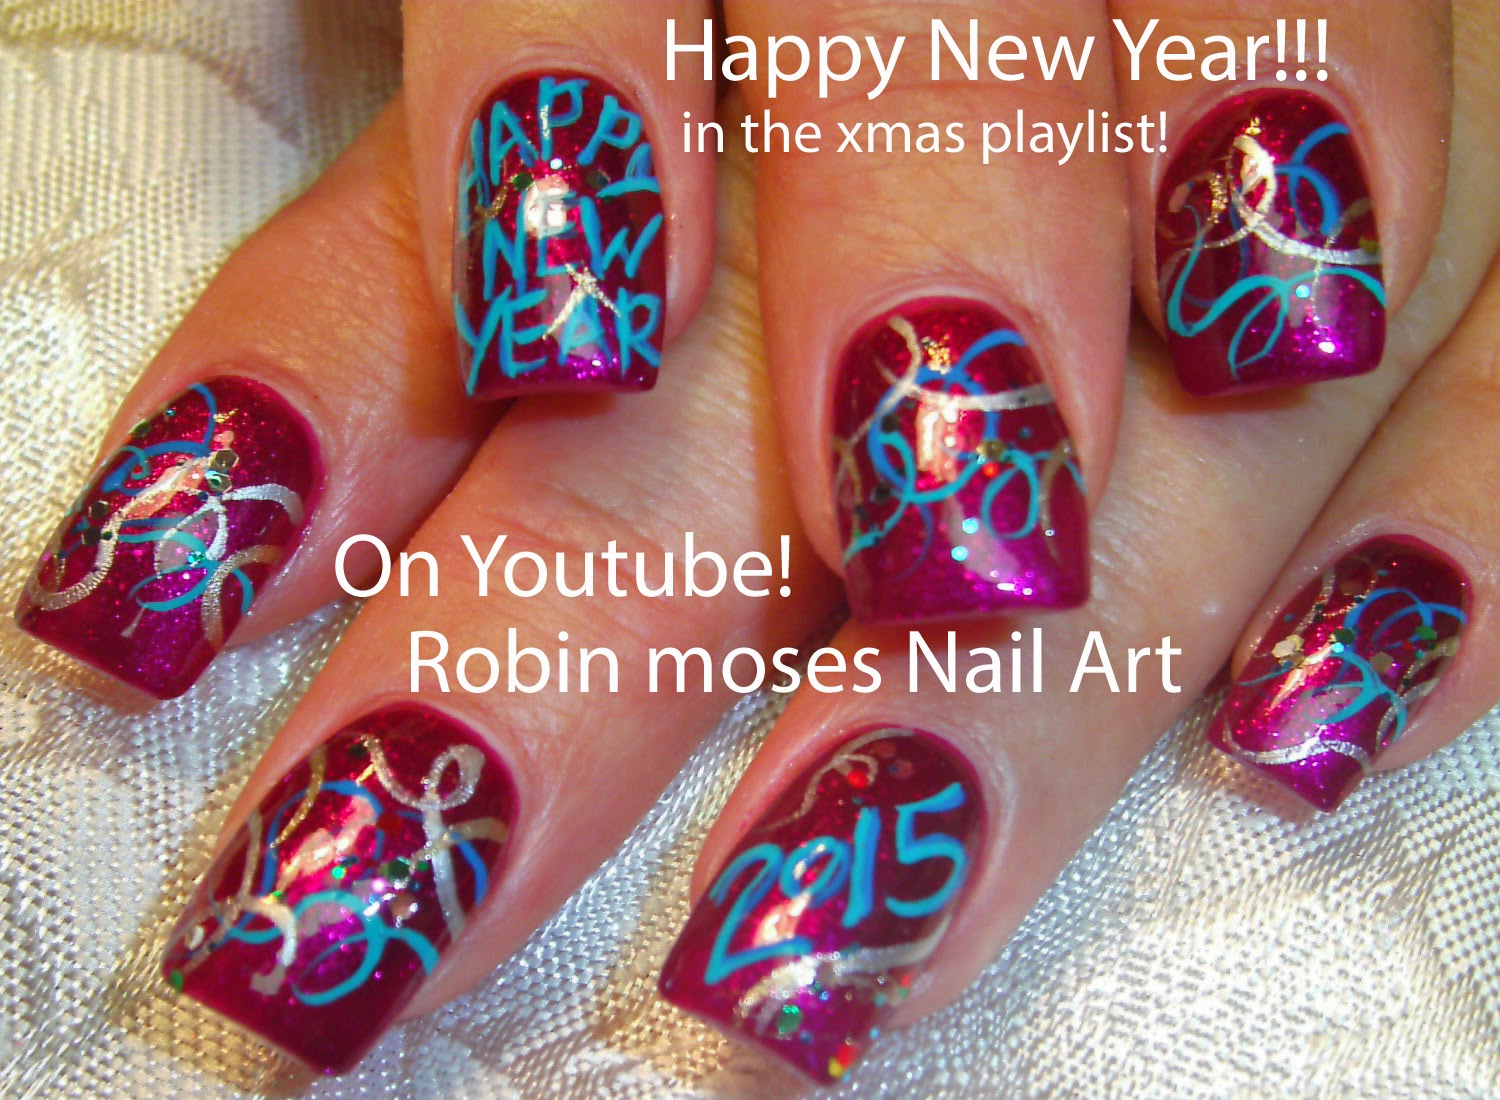 2. "2024 New Year's Nail Art on a Cruise" - wide 6